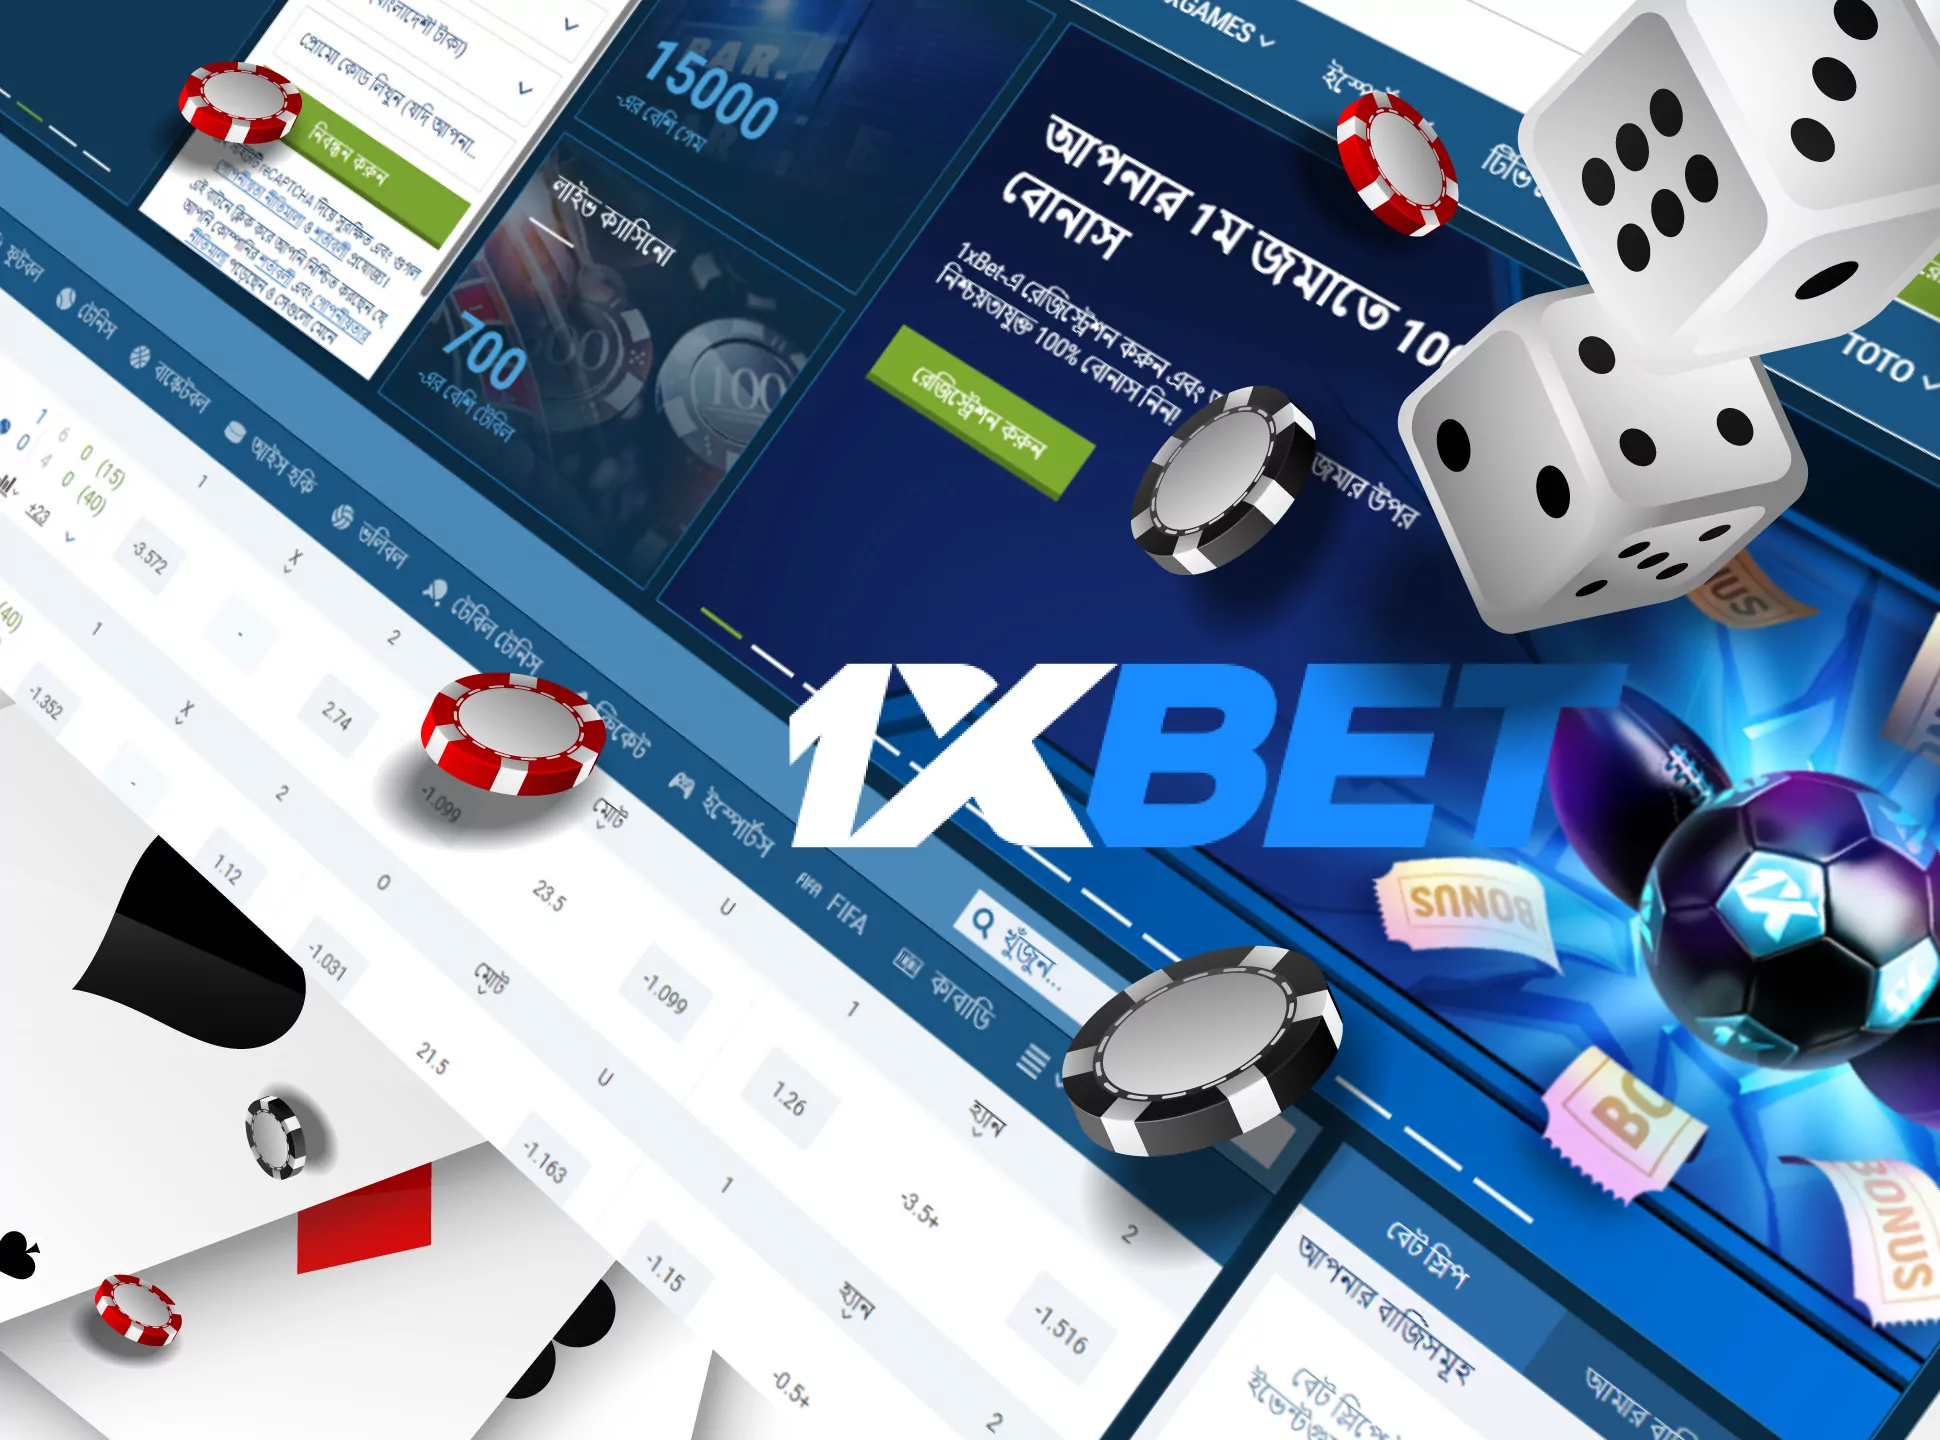 There are various payment methods at 1xbet.